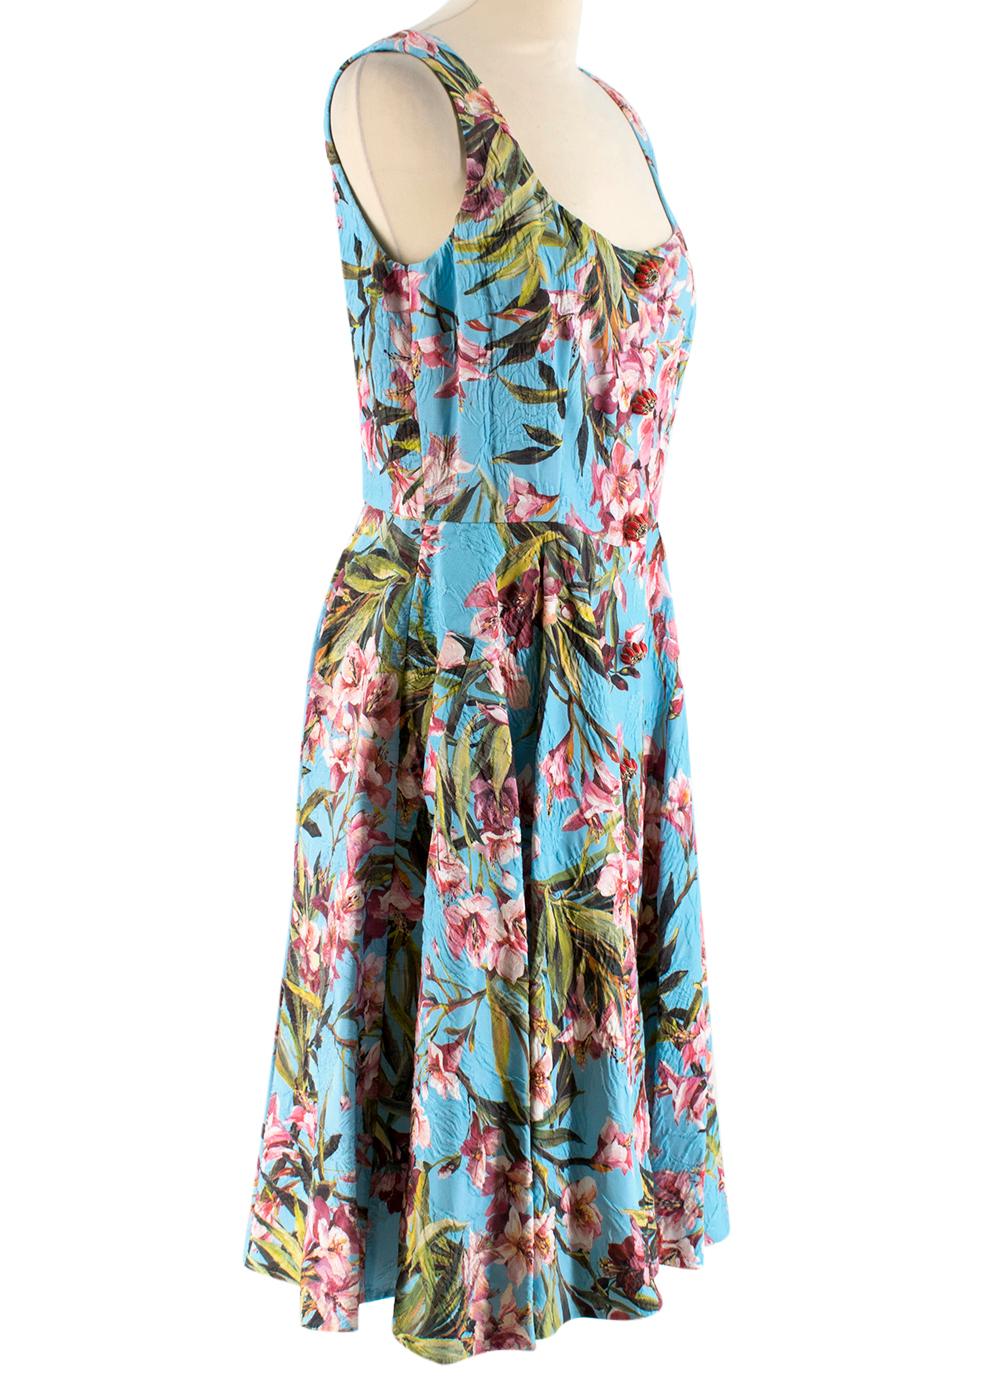 Dolce & Gabbana Blue Floral Sleeveless Dress

- Large embellished buttons
- Lined corset
- Zip rear fastening
- Pleated skirt 

Made in Italy 

Dry clean only 

Measurements are taken with the item lying flat, seam to seam.
Shoulder to Shoulder: